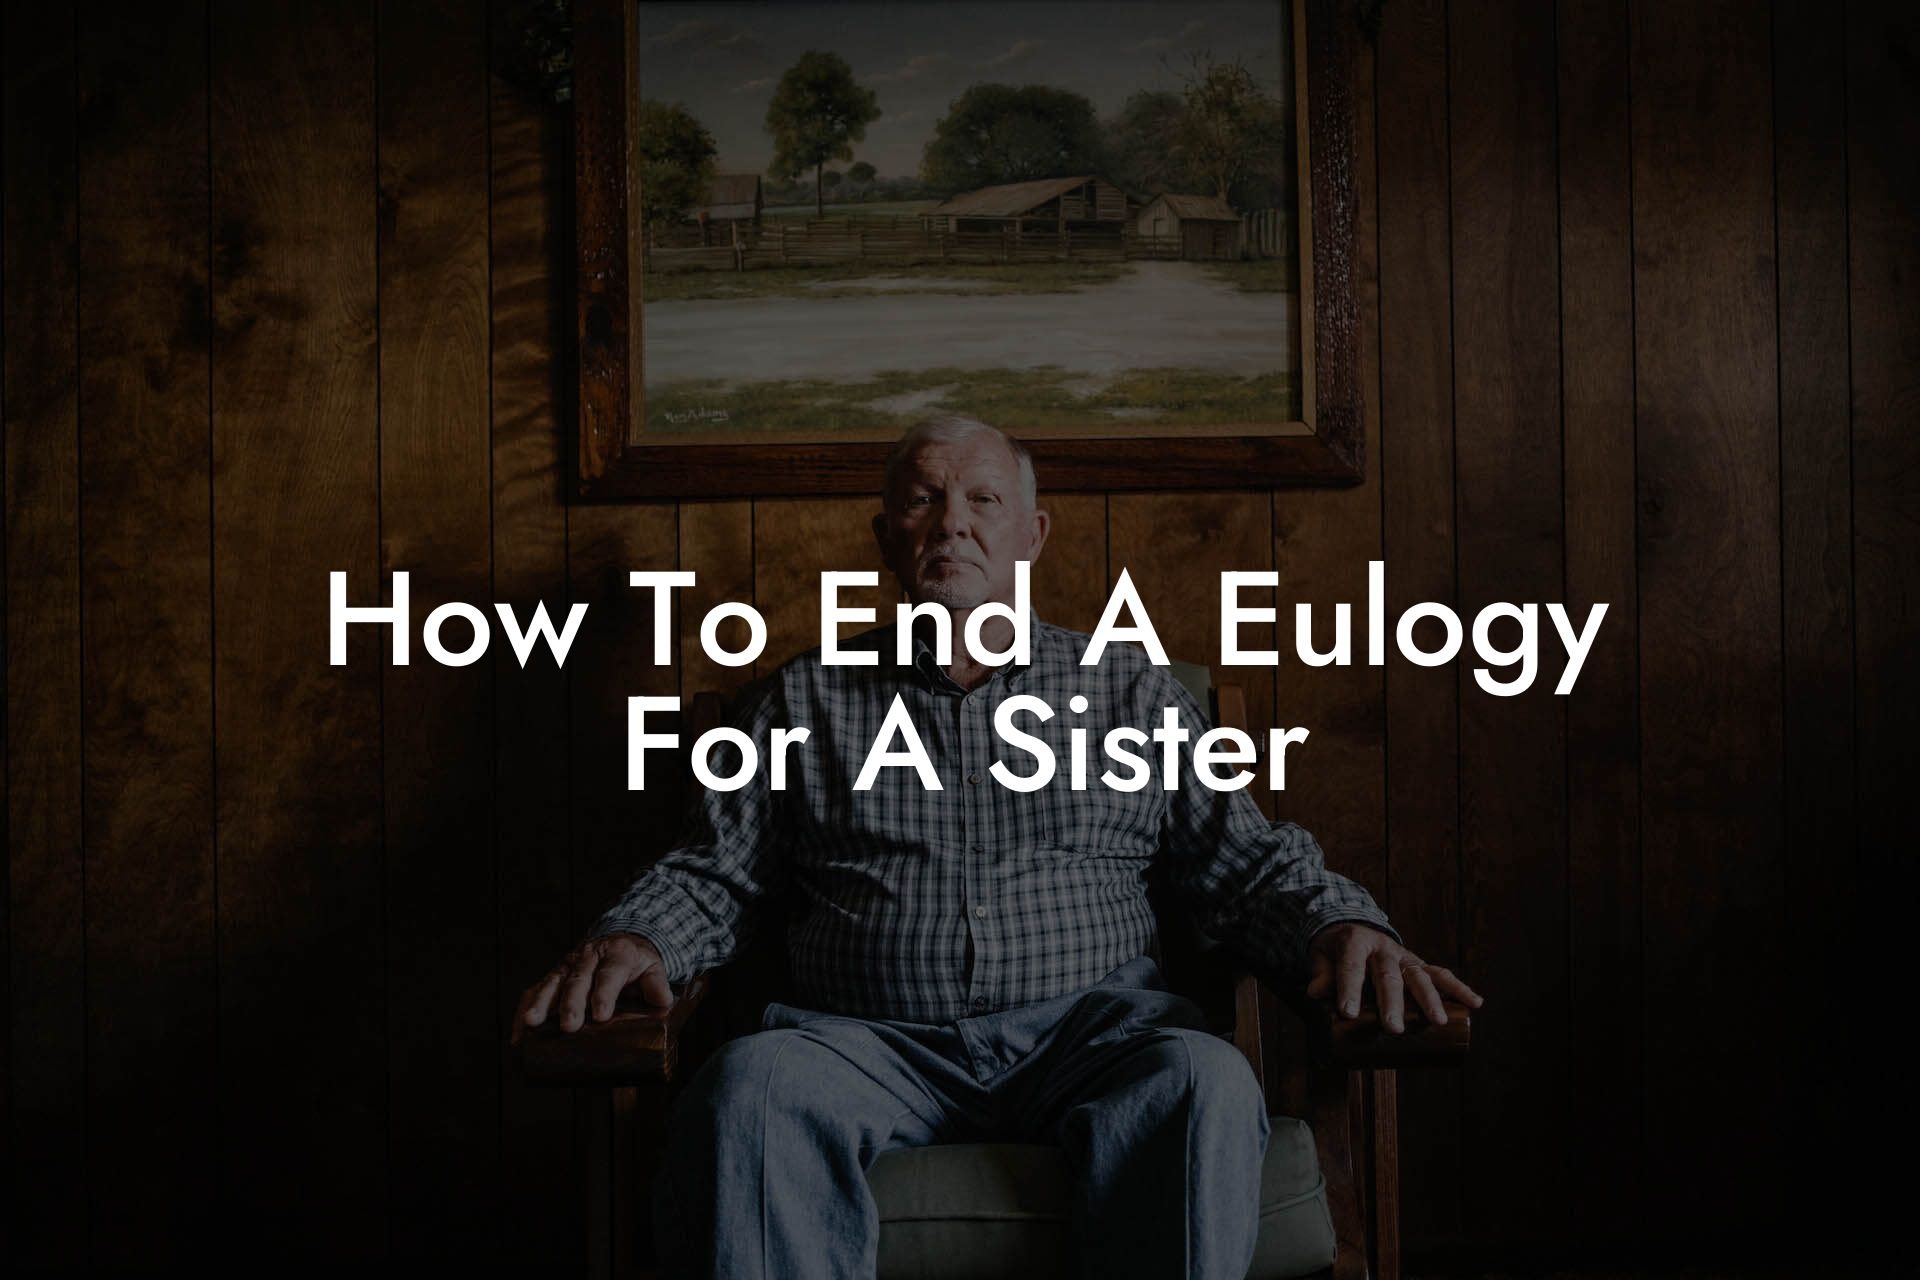 How To End A Eulogy For A Sister